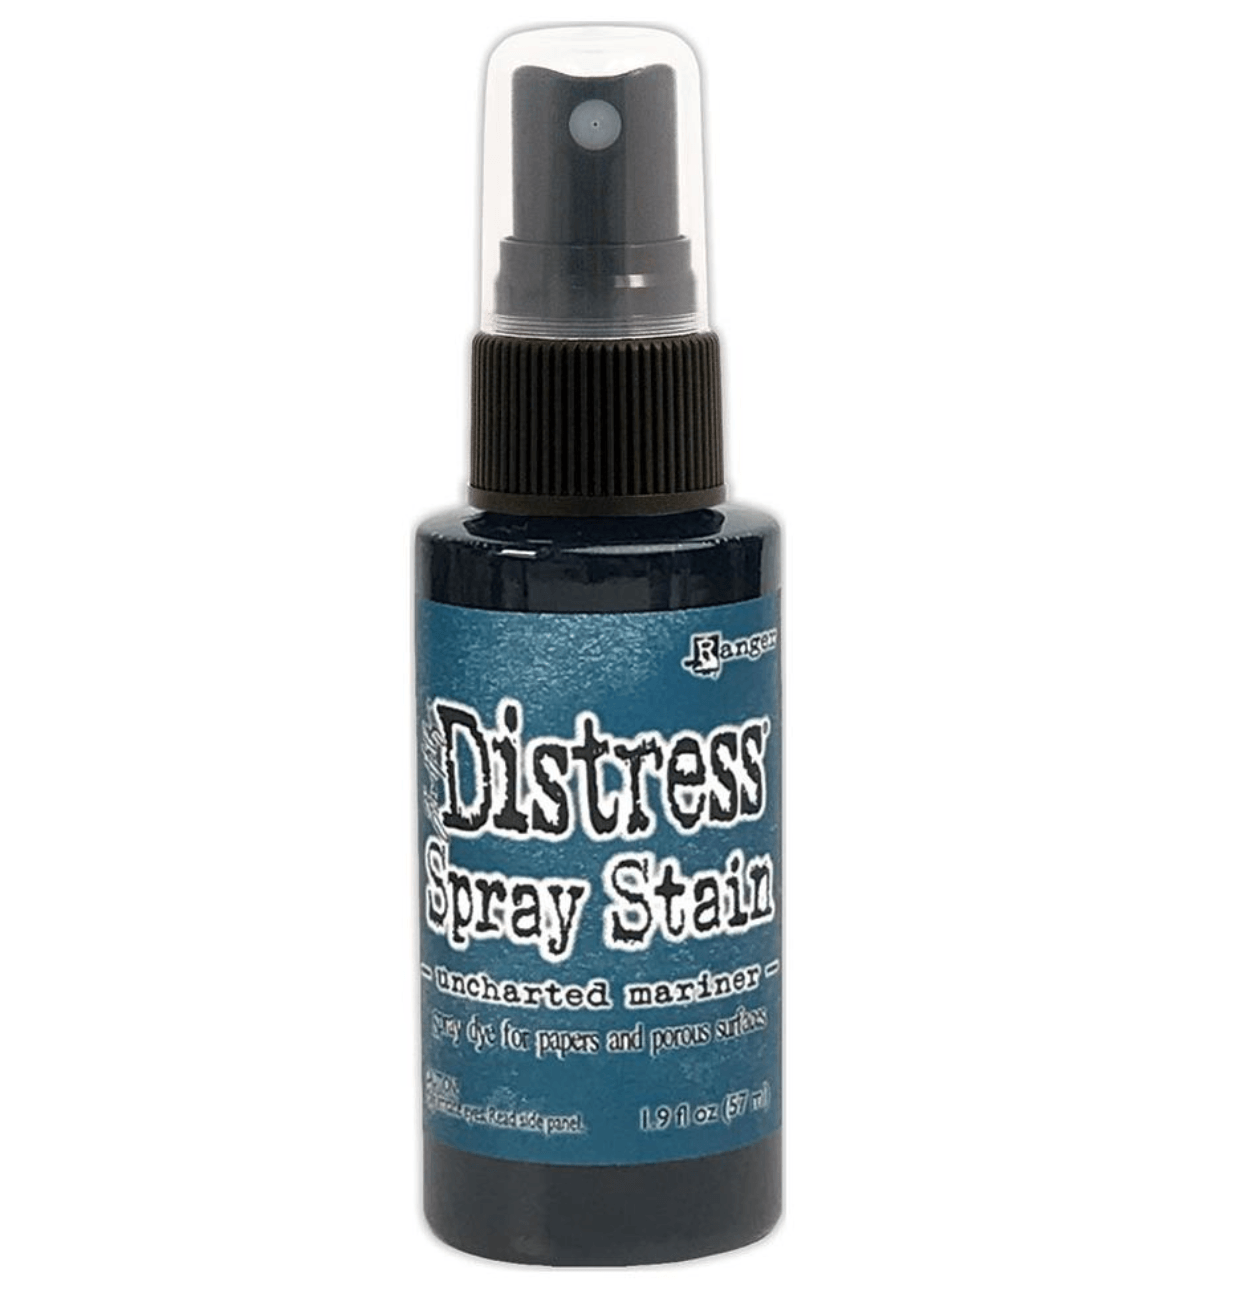 Tim Holtz Distress Spray Stain - Uncharted Mariner - Ranger Ink - Messy Papercrafts